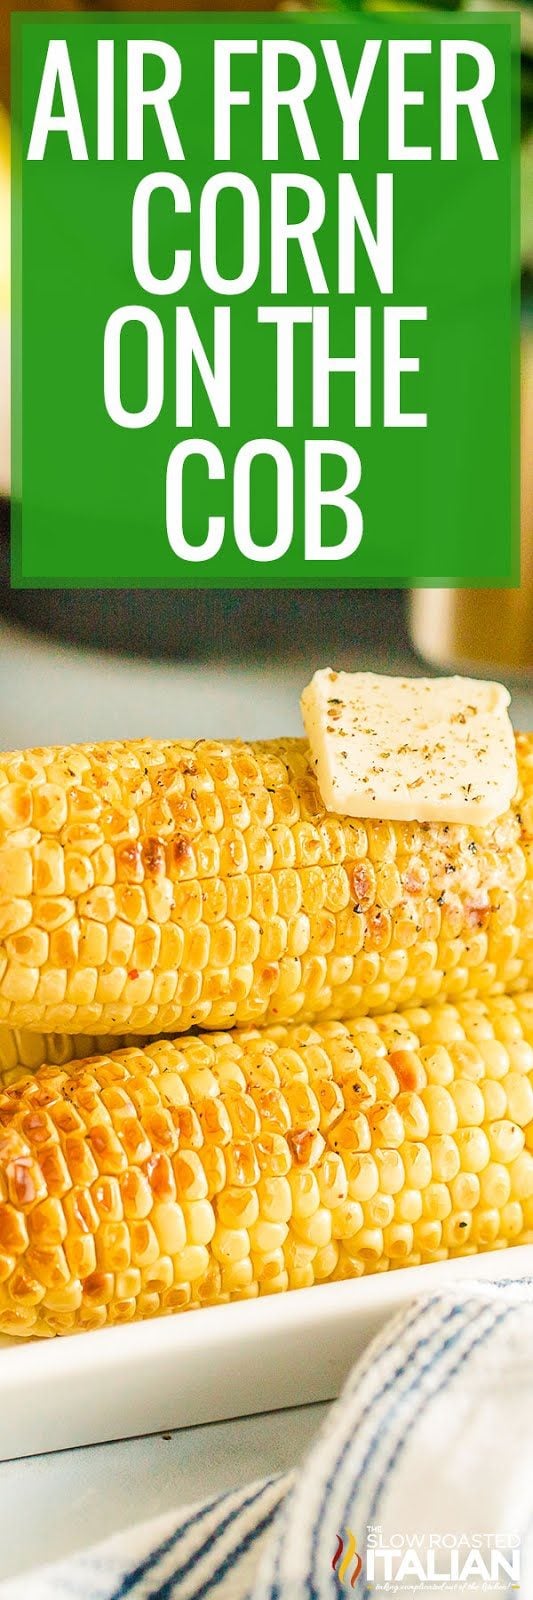 titled image (and shown): air fryer corn on the cob